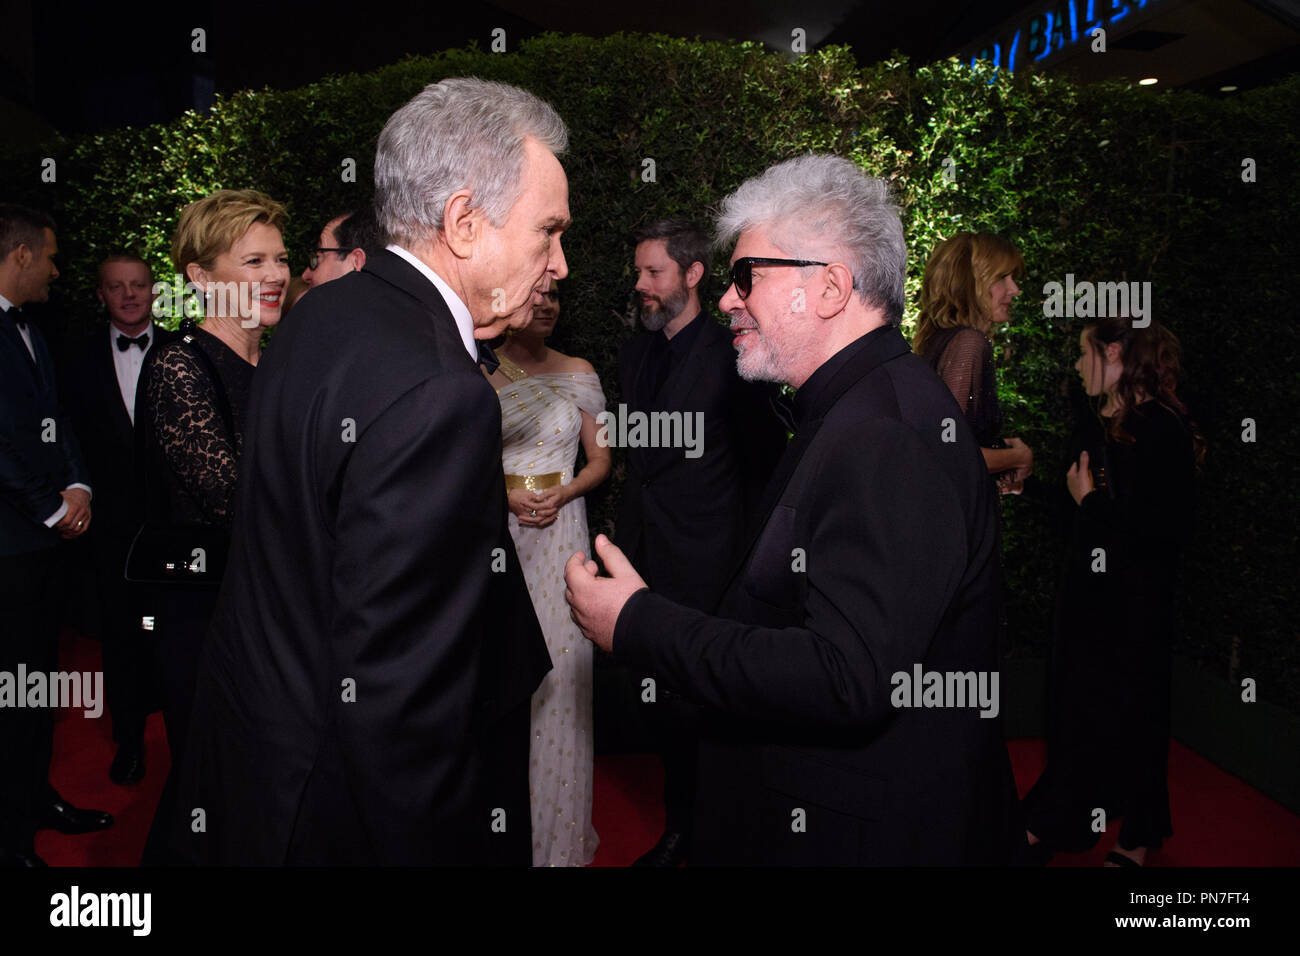 Warren Beatty (left) and Pedro Almodovar attend the Academy’s 8th Annual Governors Awards in The Ray Dolby Ballroom at Hollywood & Highland Center® in Hollywood, CA, on Saturday, November 12, 2016.  File Reference # 33153 097THA  For Editorial Use Only -  All Rights Reserved Stock Photo